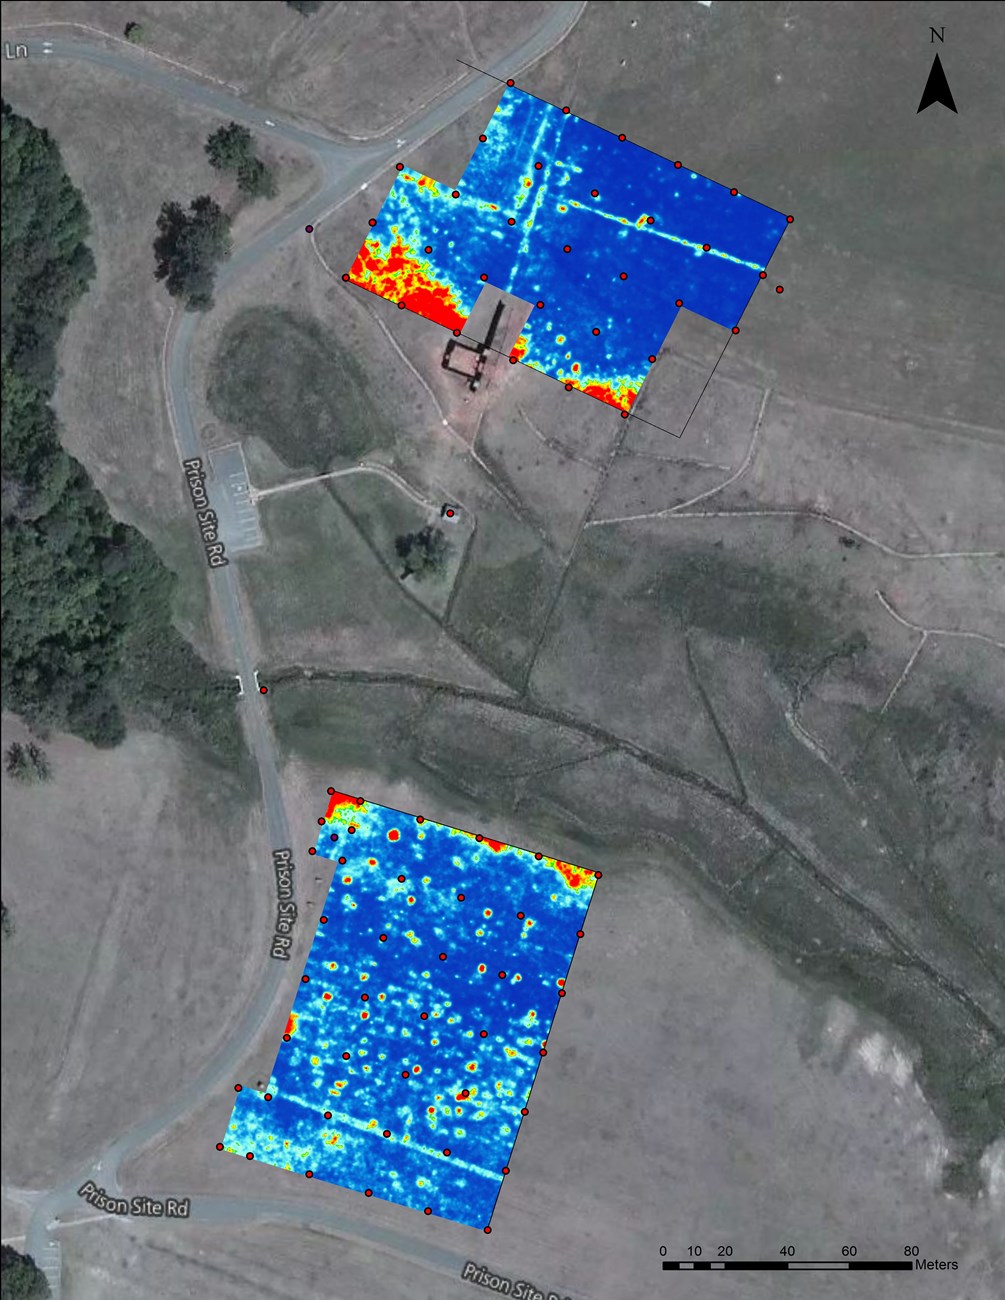 Ground penetrating radar data from the south and north slopes of the Andersonville prison enclosure surveyed by SEAC in early 2018.